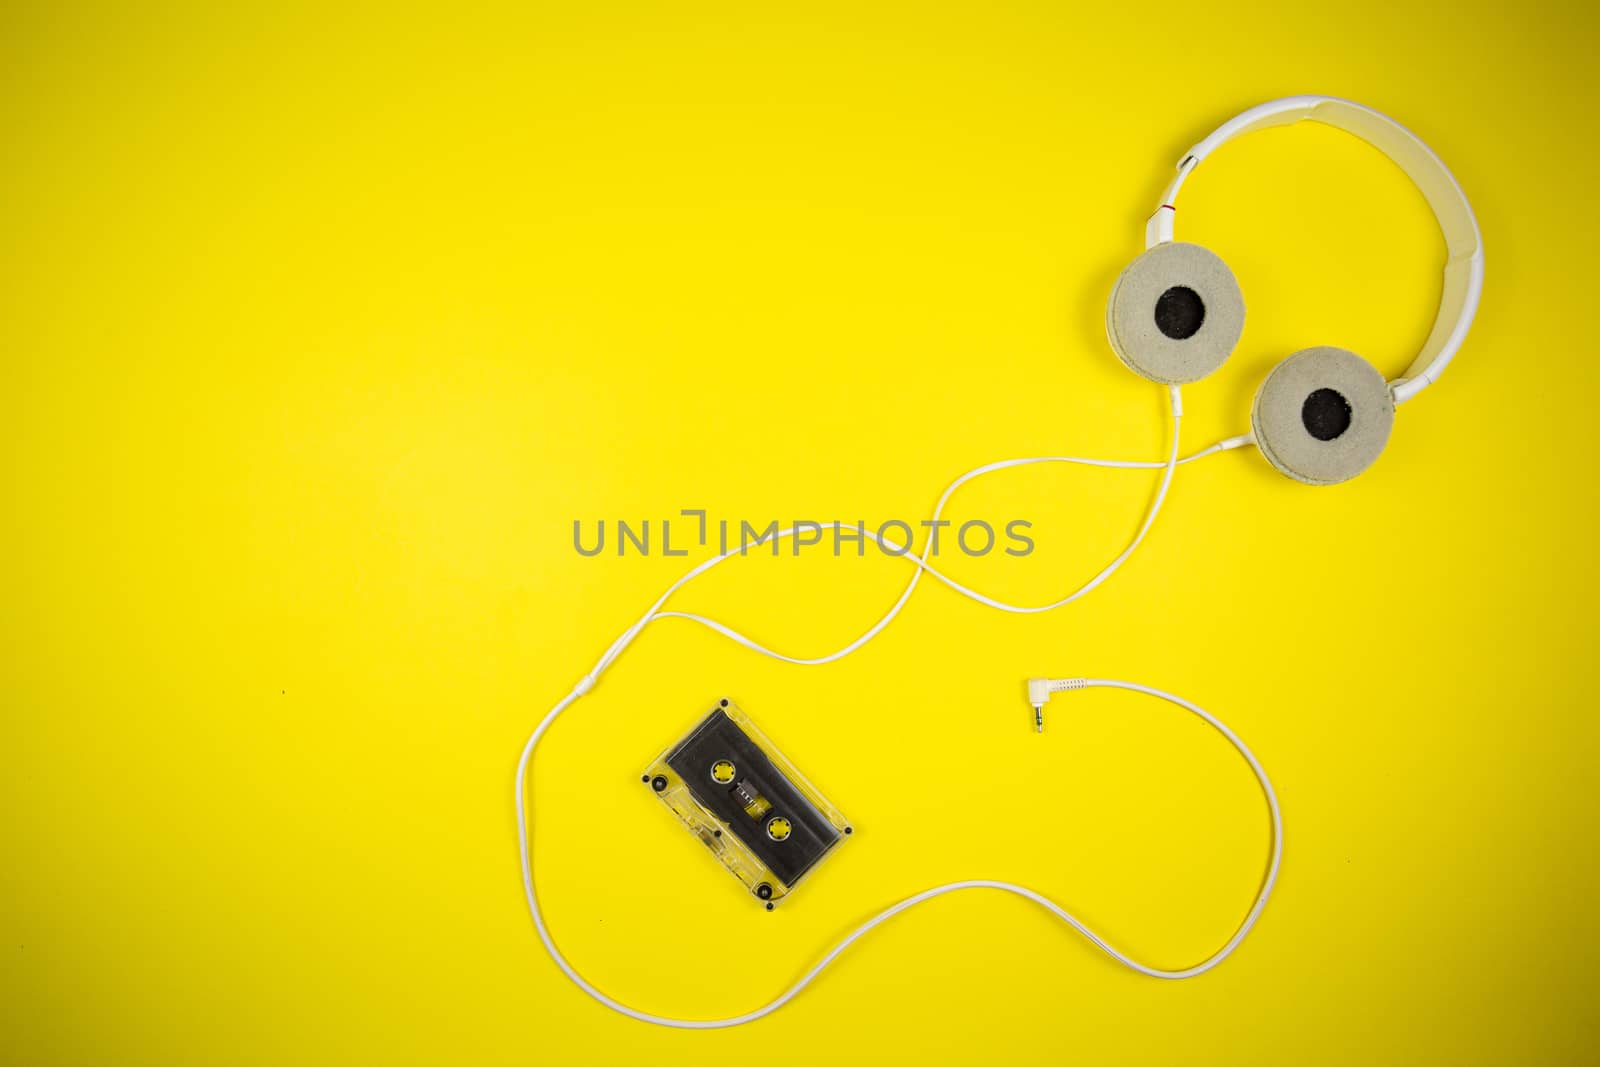 Audio cassette tape and modern headphones on a yellow background, music